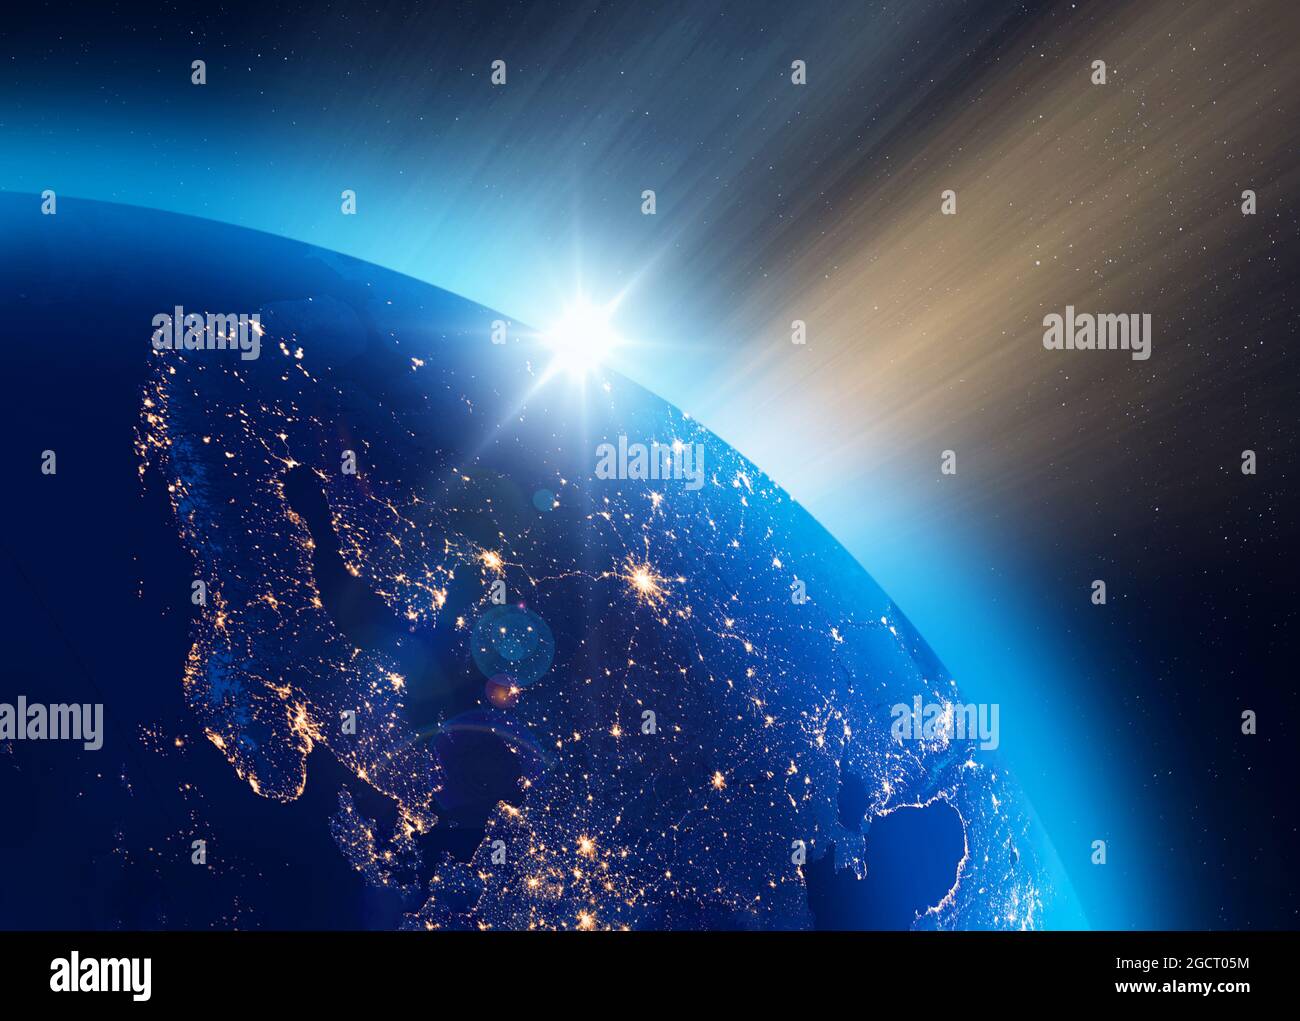 Illustration of the sunrise over Planet Earth, Scandinavia and North Europe city lights visible. Energy consumption concept. Some elements of the imag Stock Photo